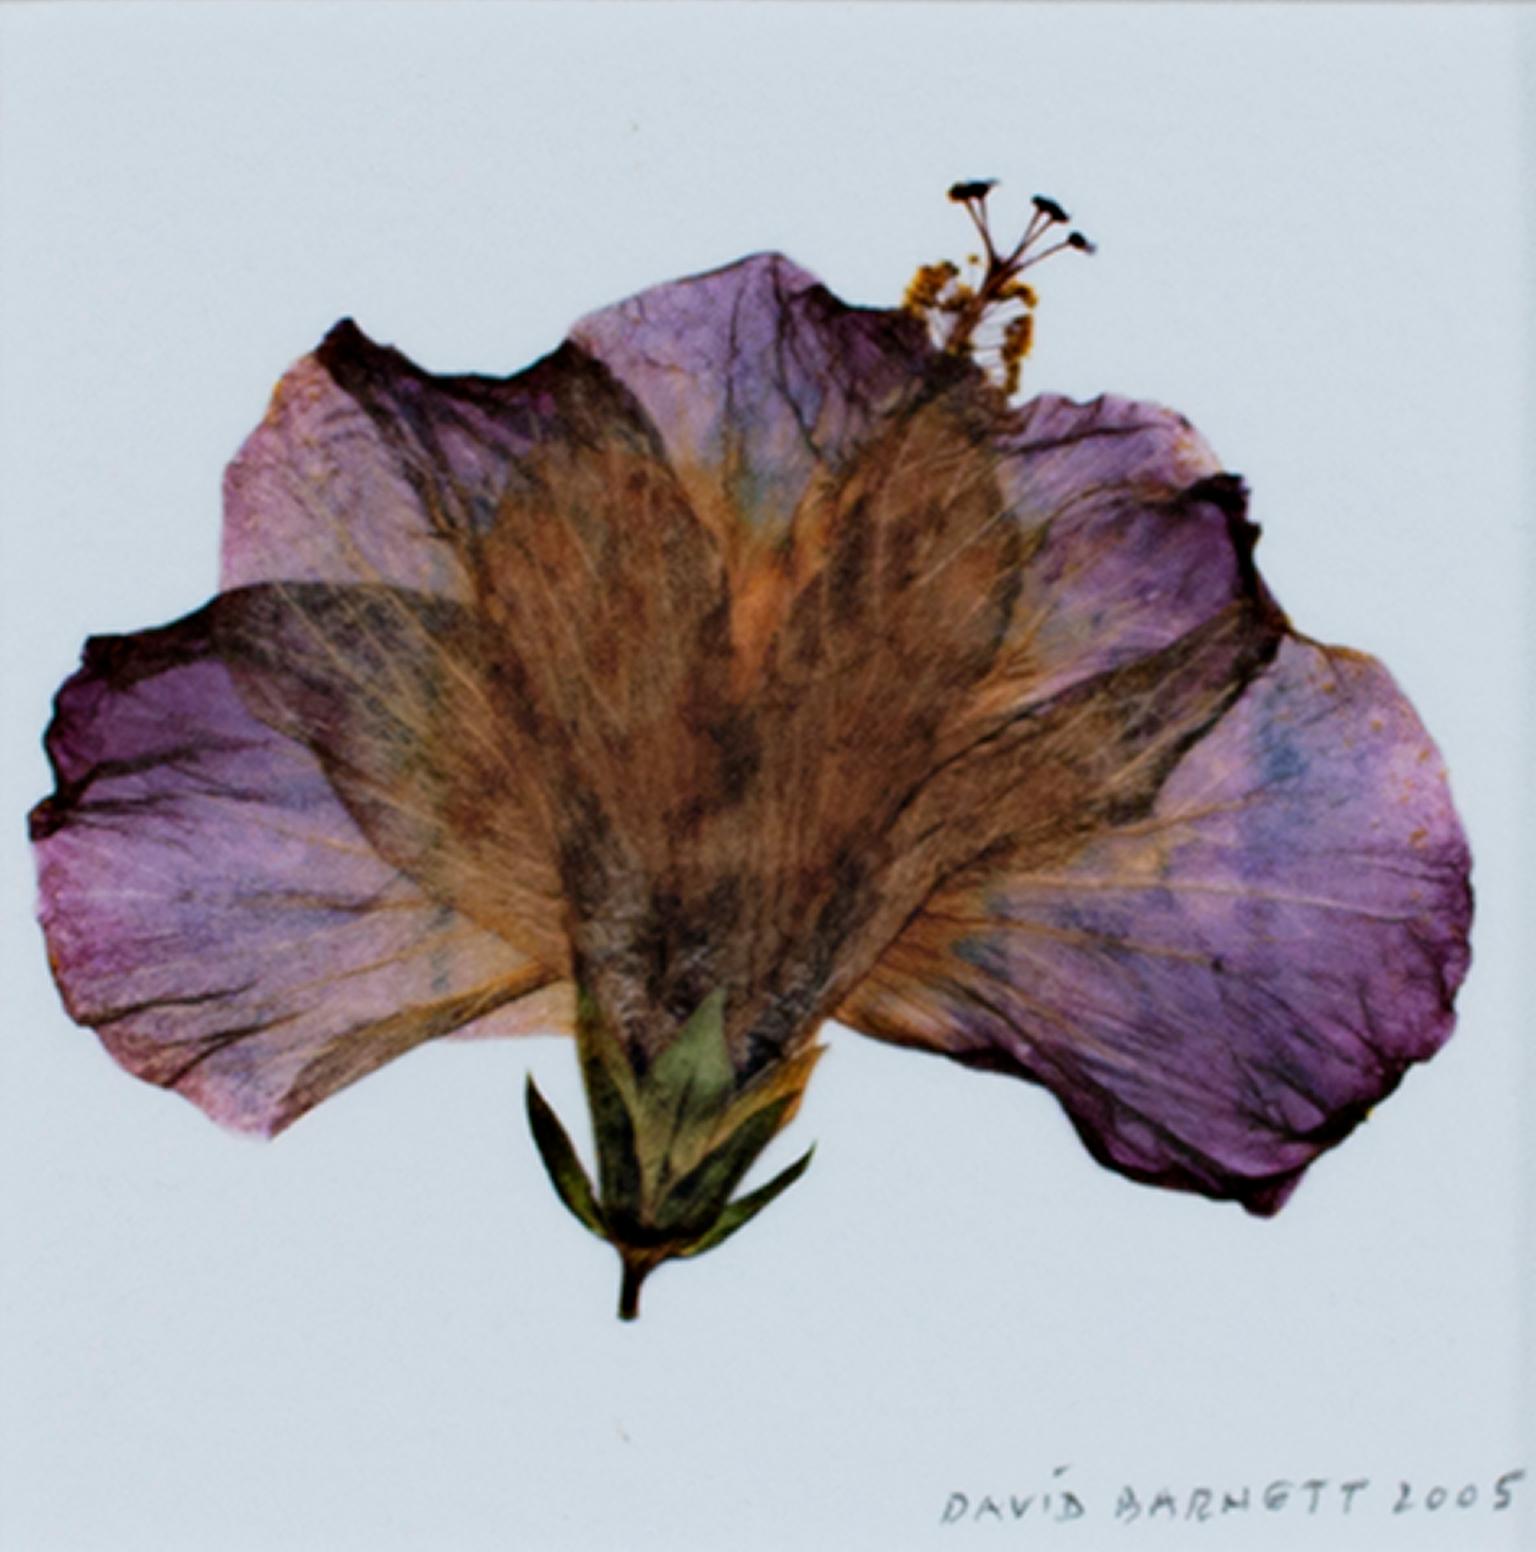 "Hybrid Hibiscus II" is an original fine art photograph by David Barnett, signed and dated in the lower right corner. The photo is printed as a giclee on archival paper and framed with all archival materials. The image is of a pressed purple